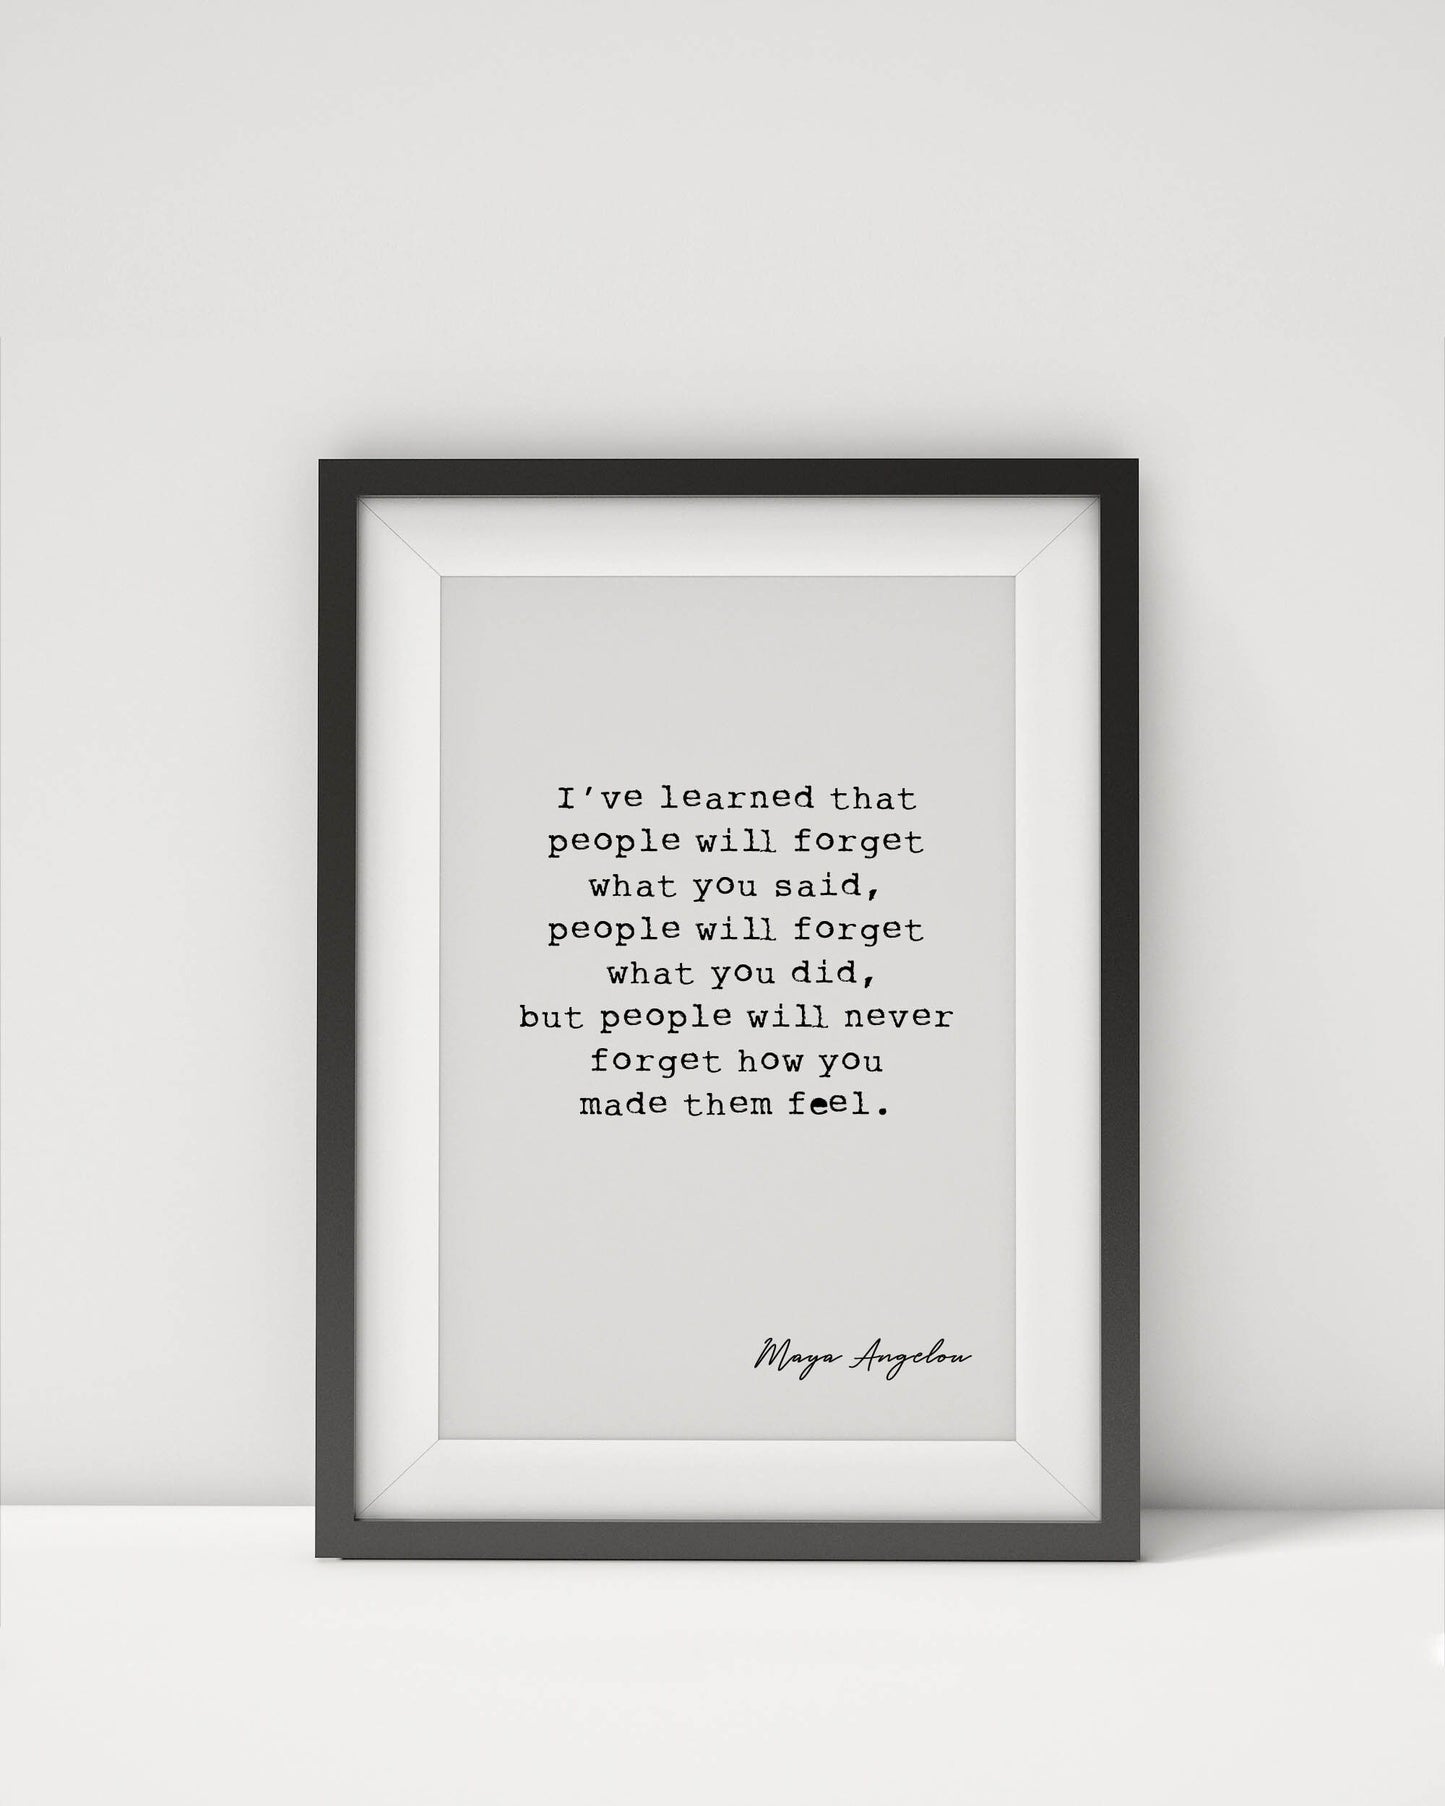 Maya Angelou Quote - I've Learned That People Will Forget Poster - Maya Angelou Print - Wall Art - Wall decor quote Framed